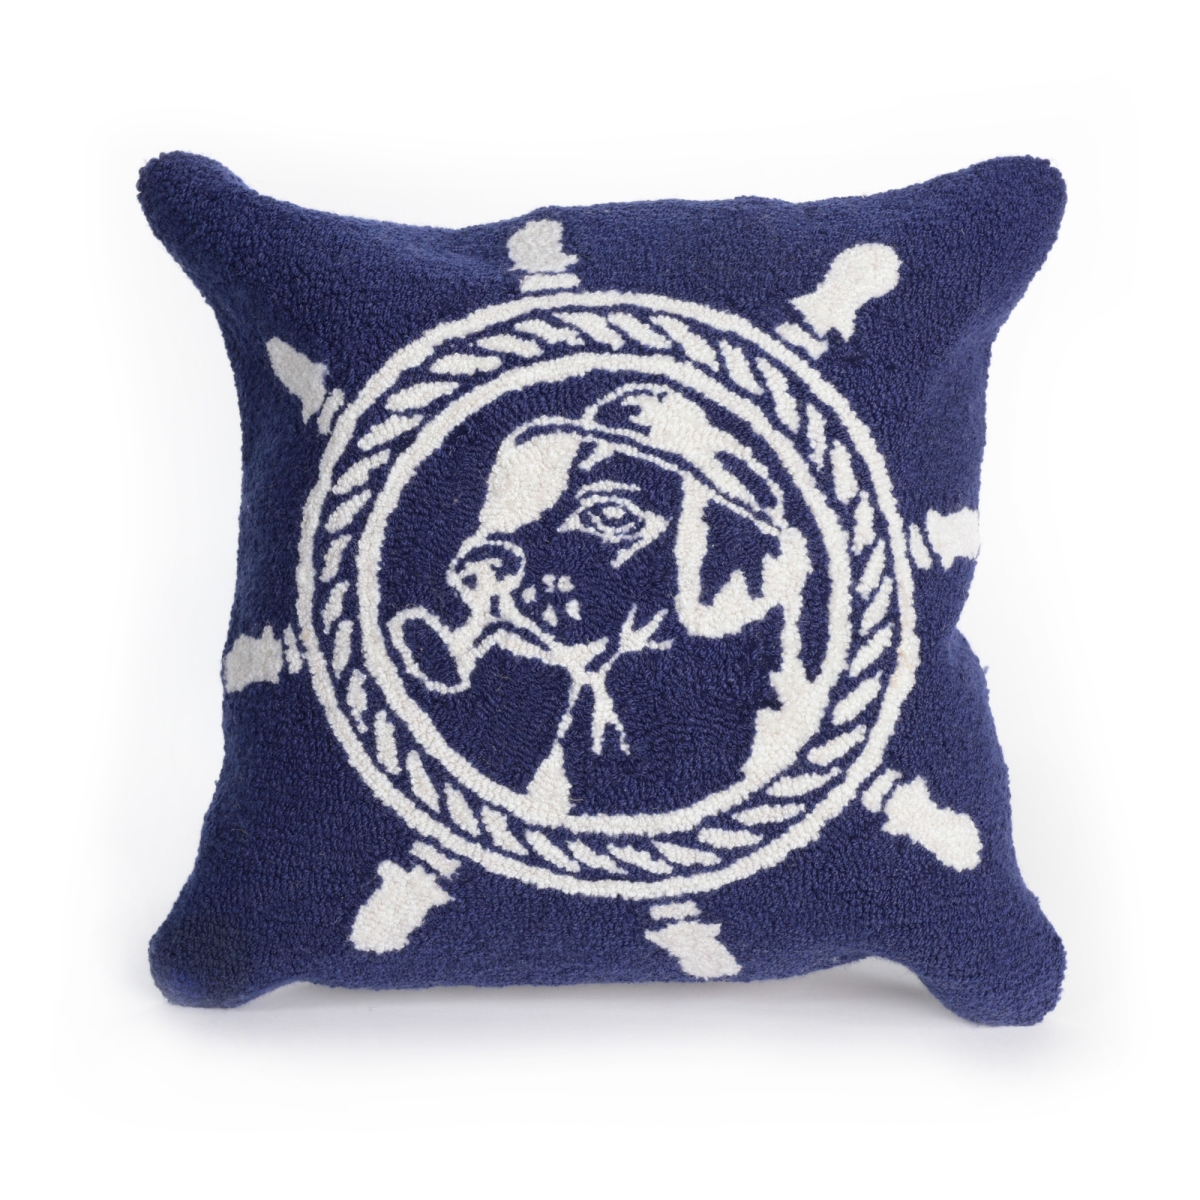 Trans-ocean Imports 7fp8s433233 18 In. Square Liora Manne Frontporch Seadog Indoor & Outdoor Hand Tufted Square Pillow - Marine